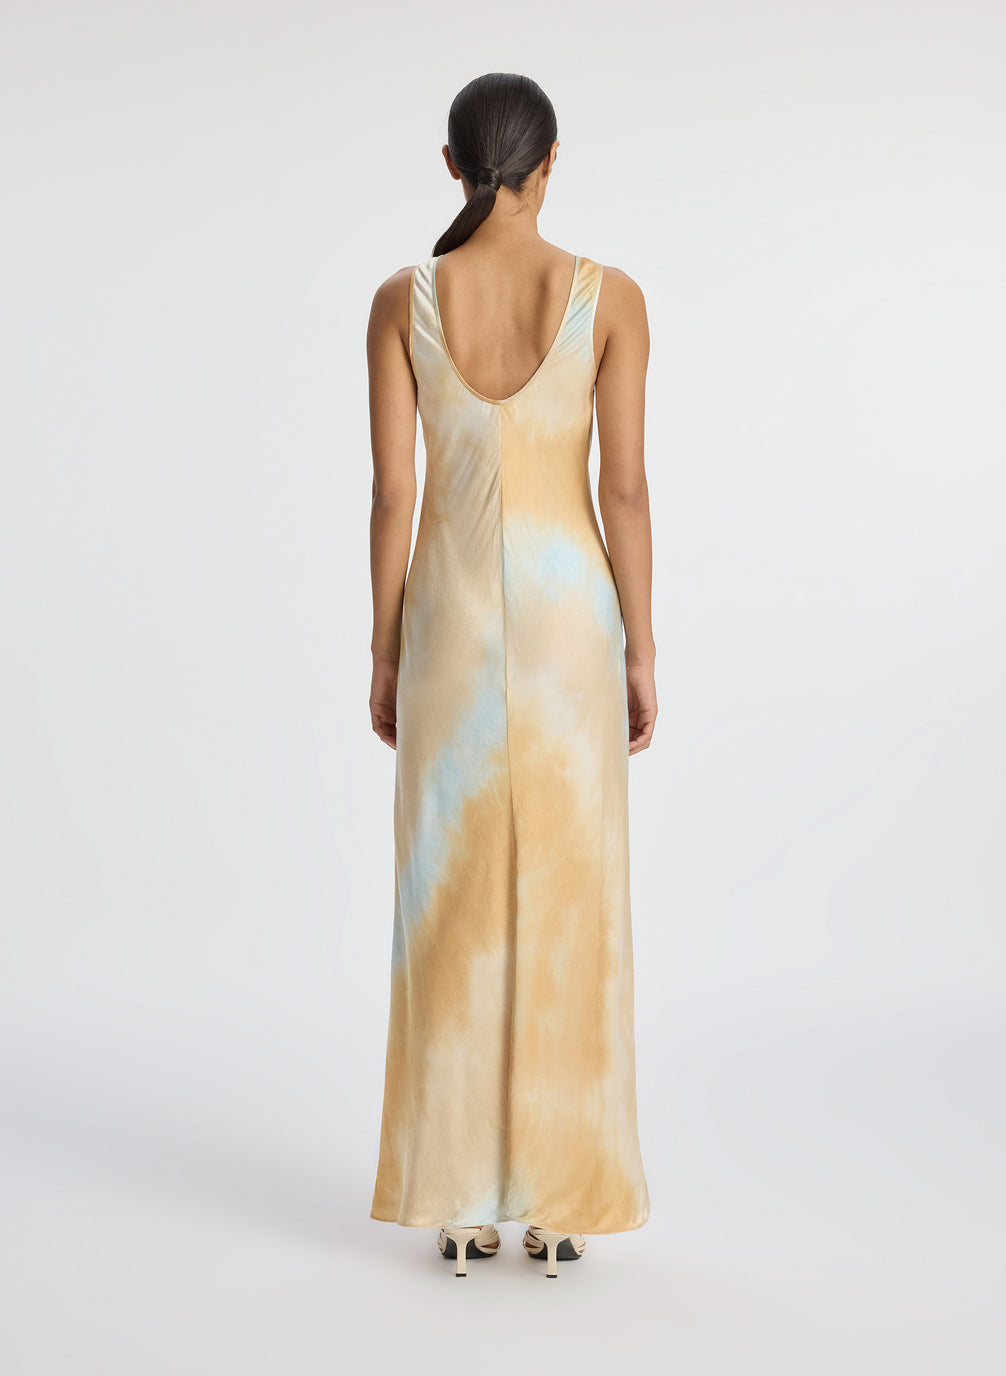 back view of woman wearing blue and beige maxi sleeveless satin dress]